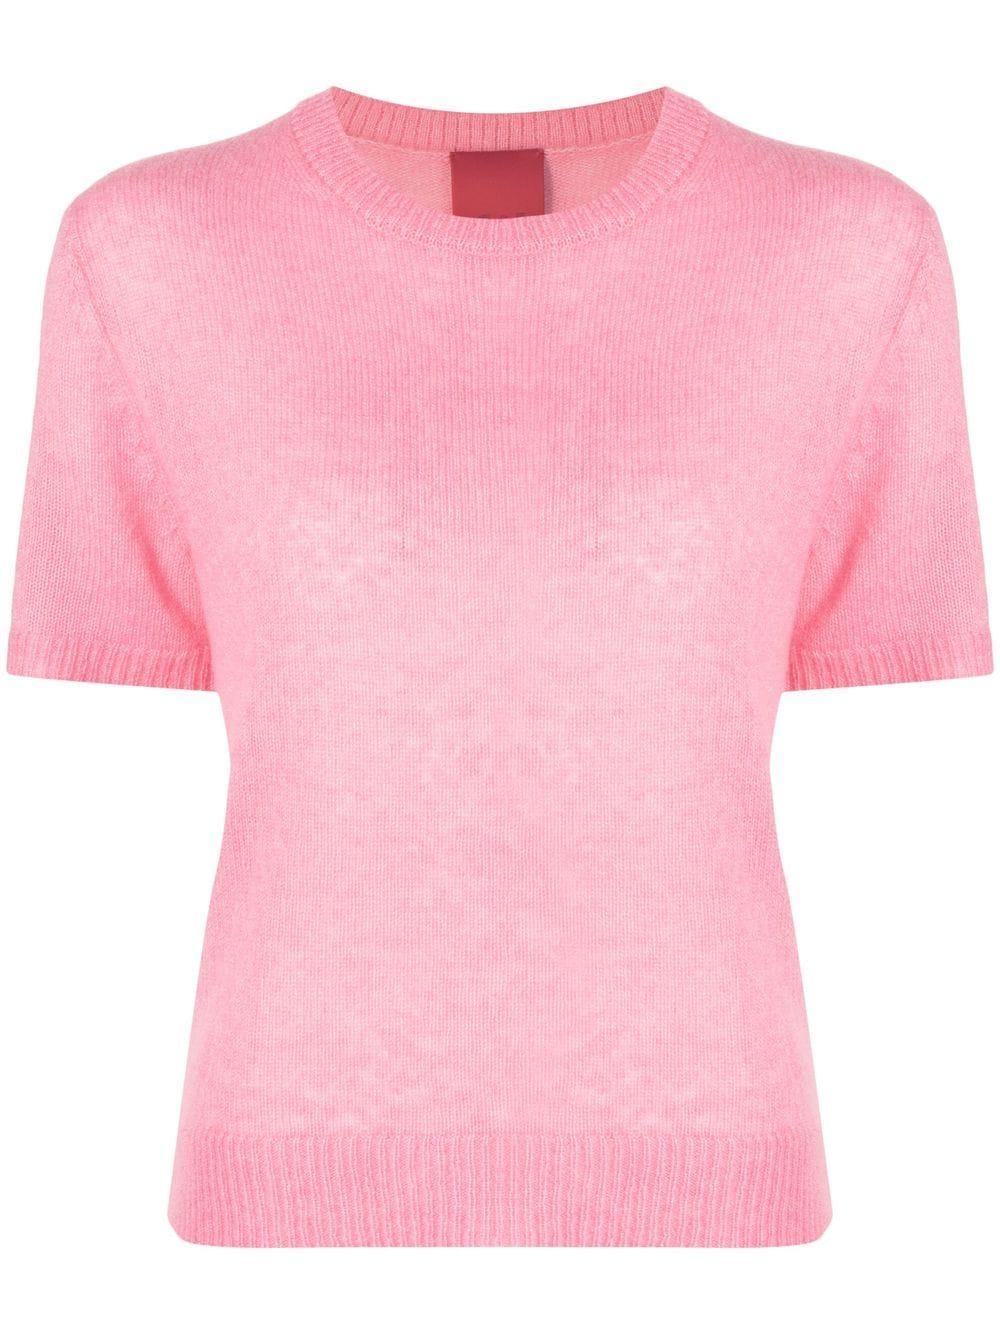 Cashmere In Love Sidley fine-knit top